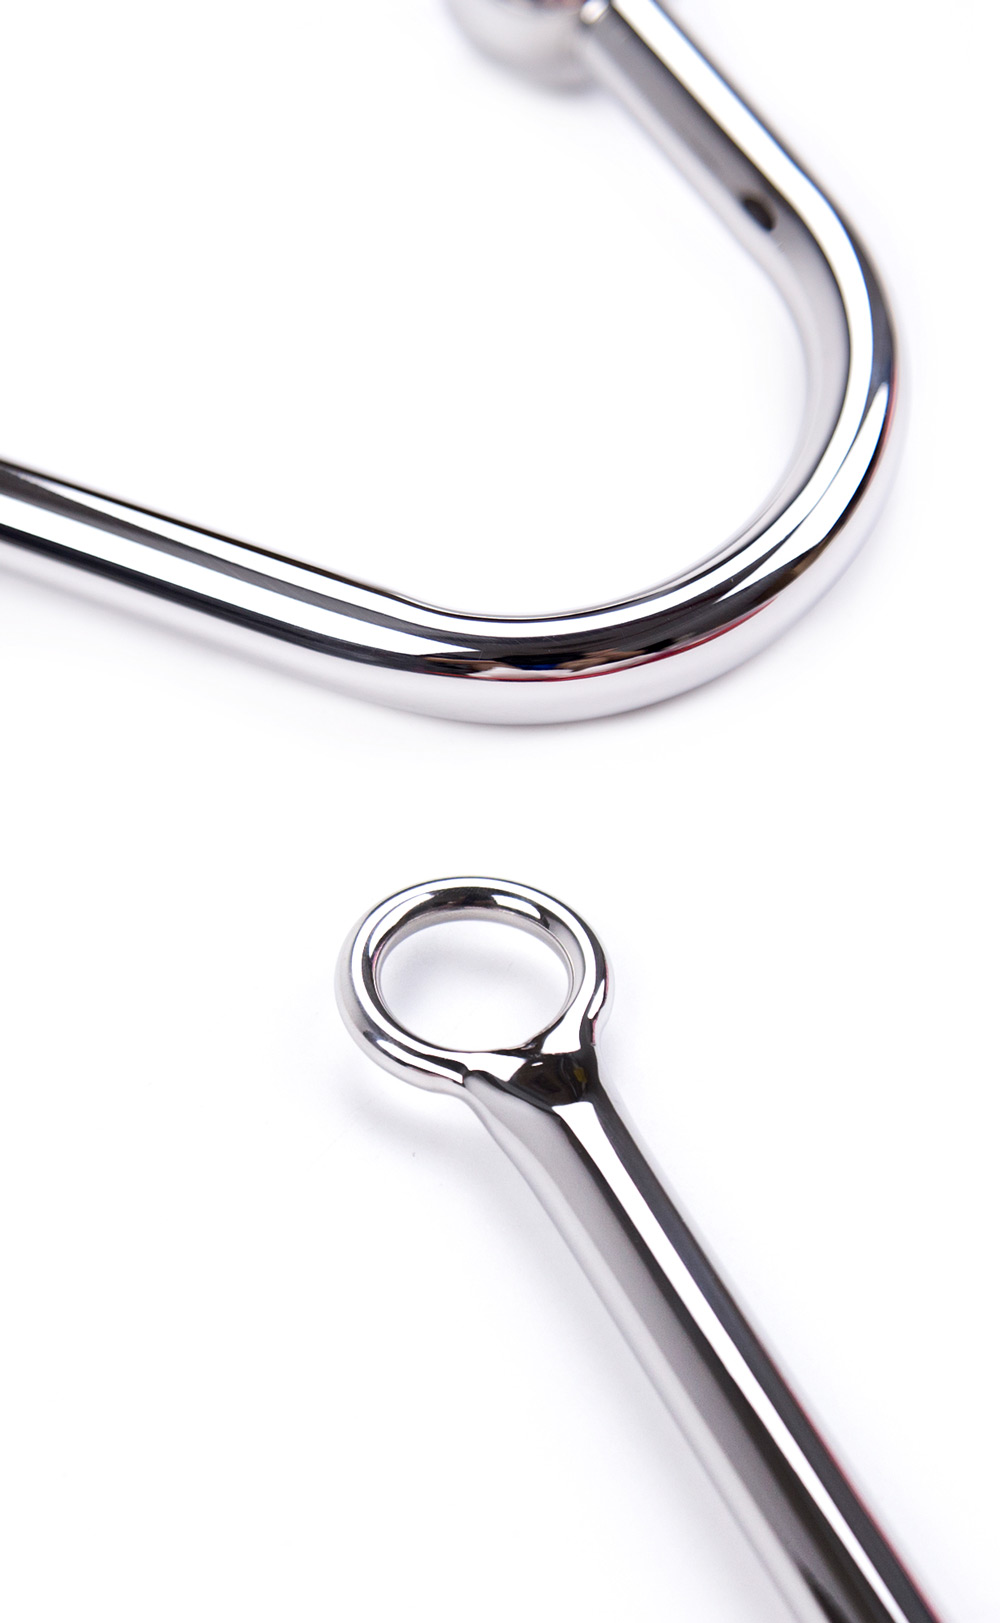 Stainless Steel Anal Hook